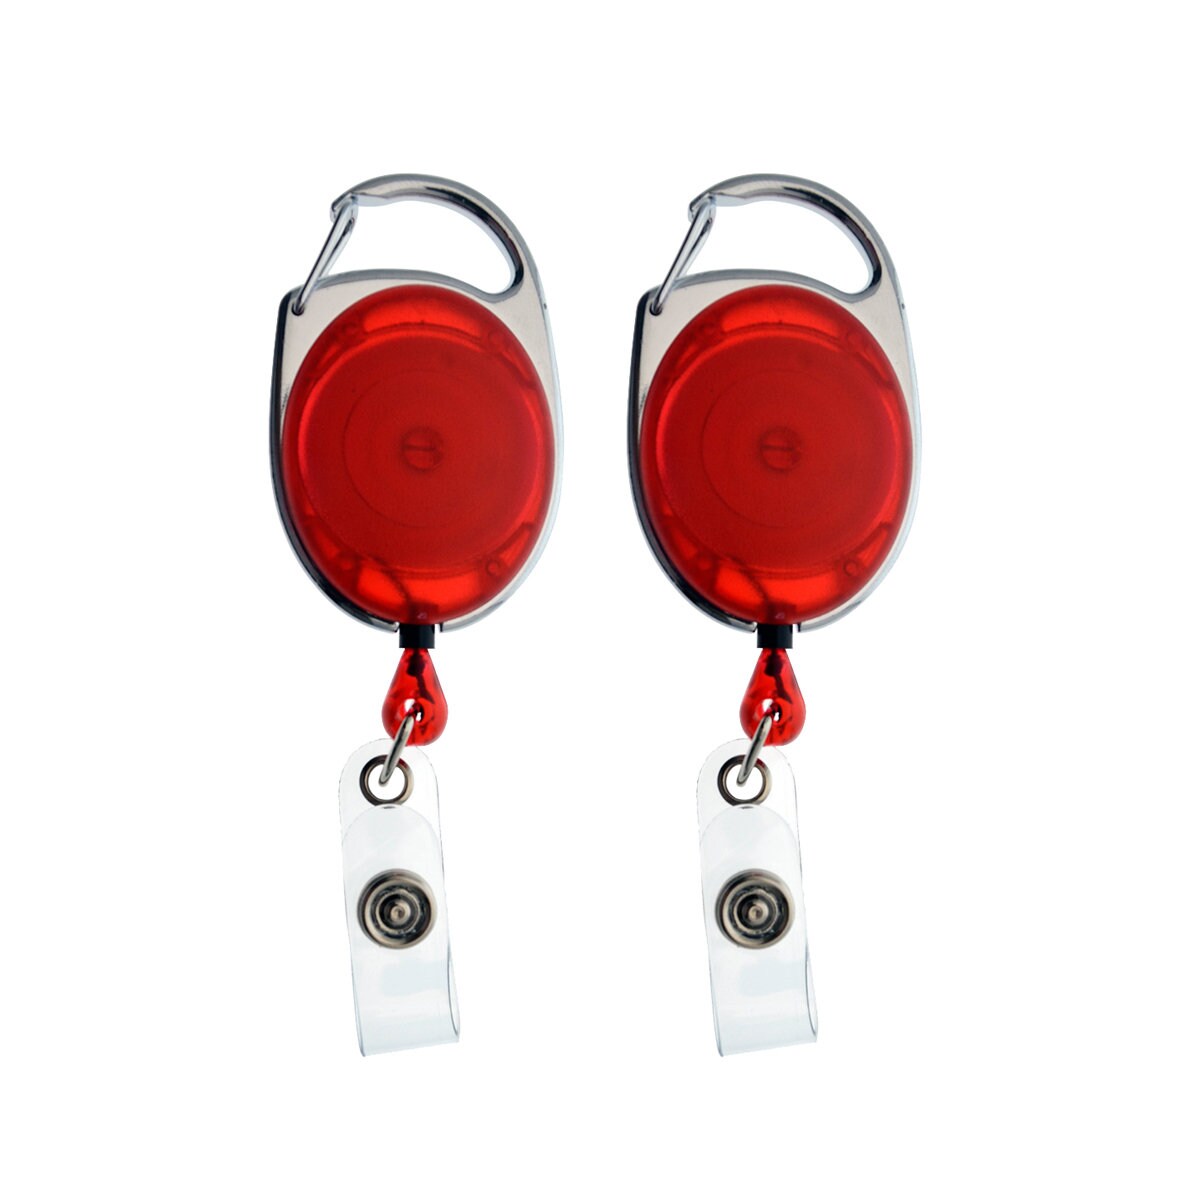 2 Pack - Specialist ID Premium Retractable Badge Reels with Carabiner Belt Loop Clip and ID Holder Strap by Specialist ID (Red)